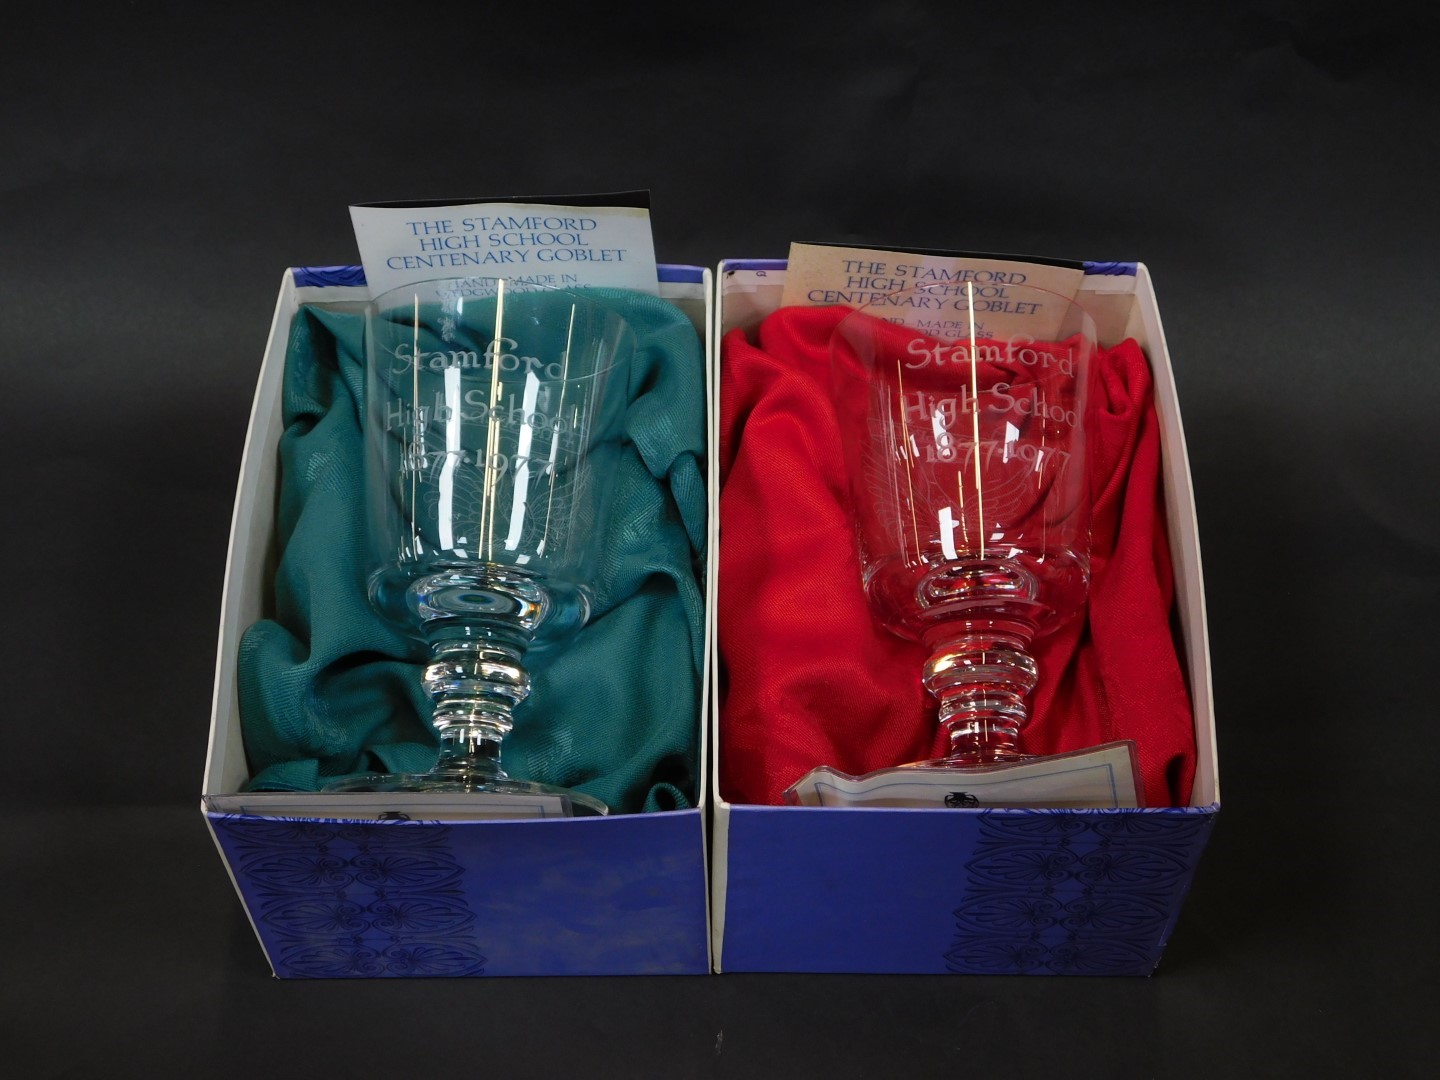 A pair of Wedgwood cut glass Stamford High School Centenary goblets, etched Stamford High School